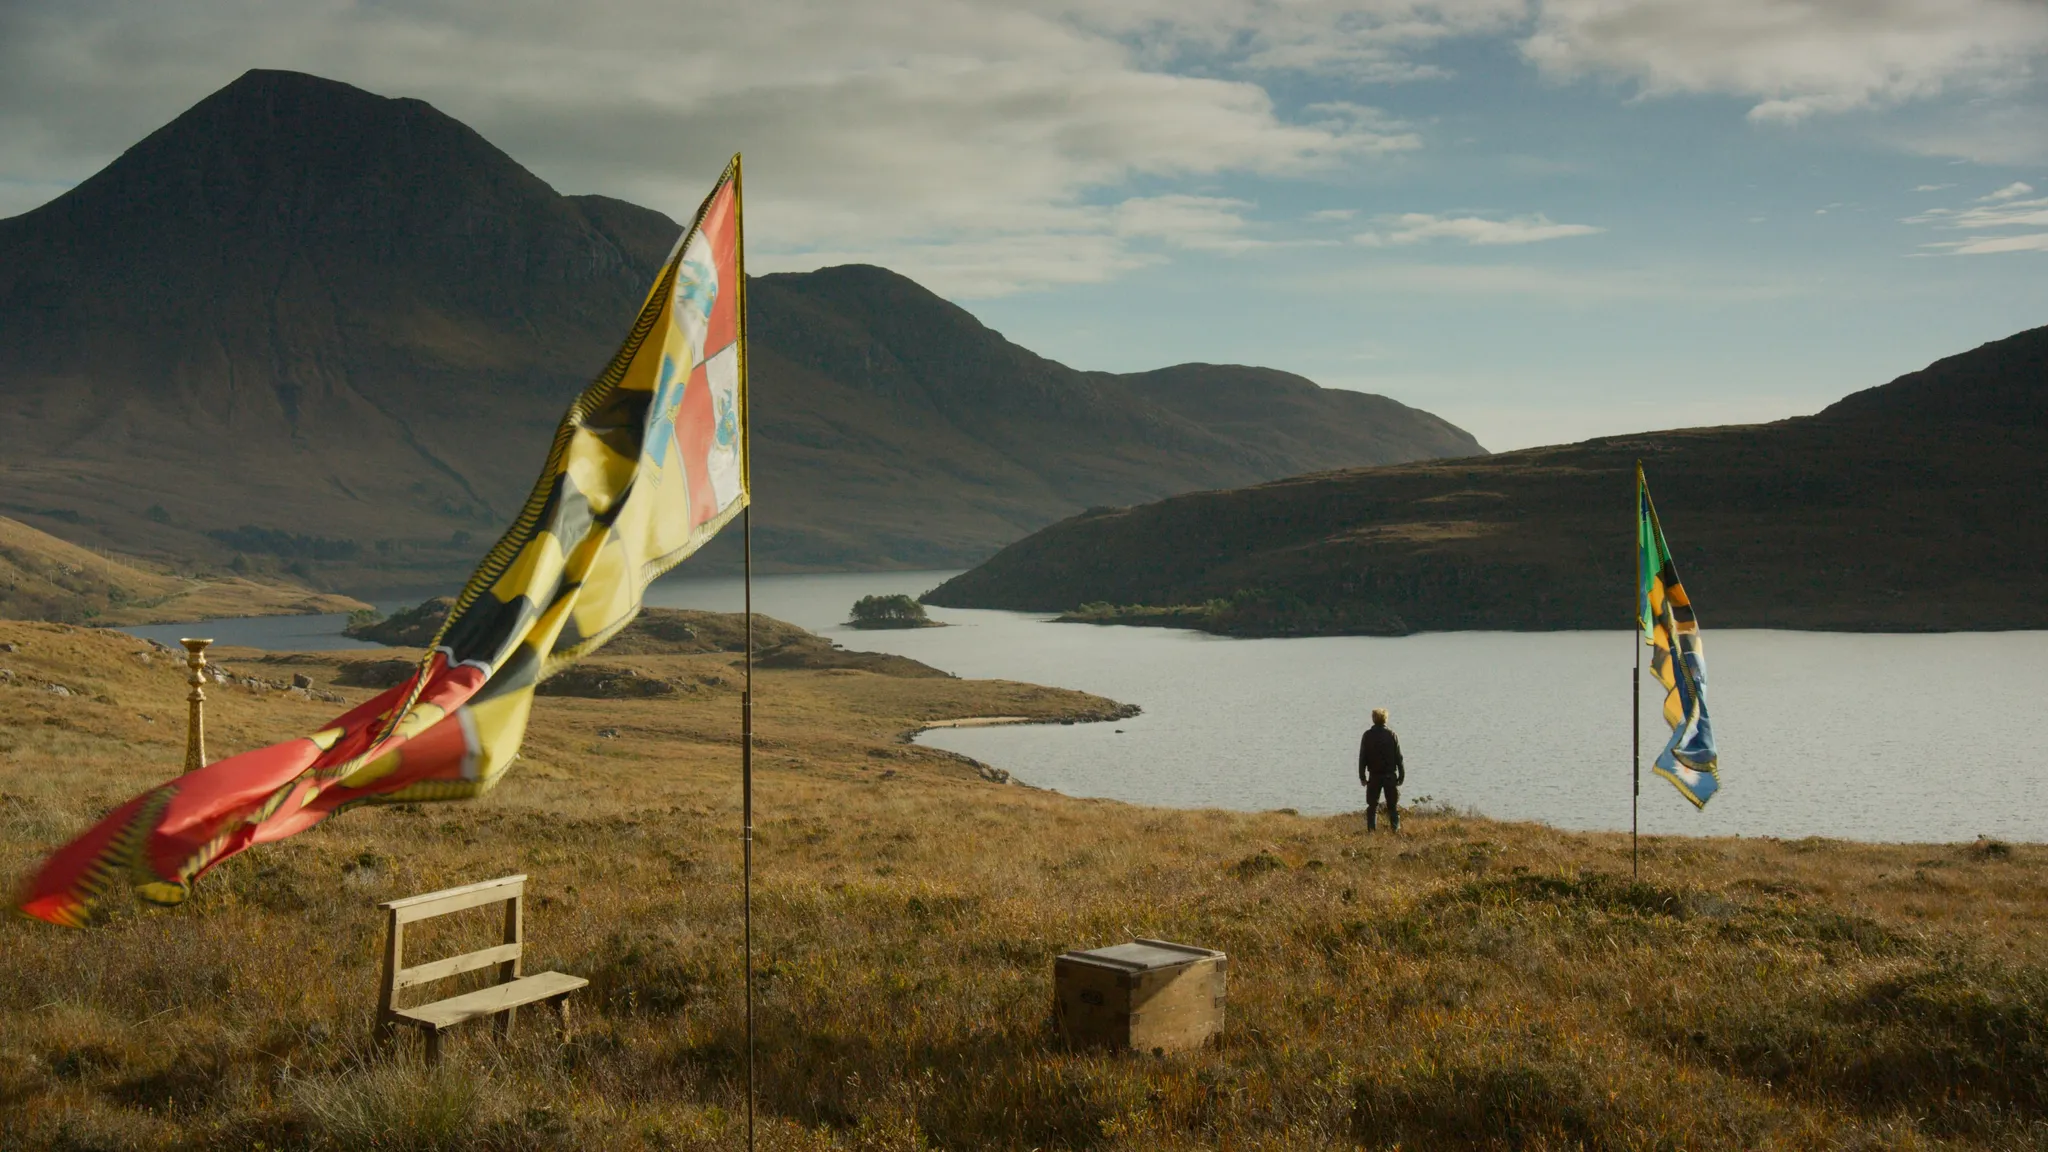 A mountainous landscape with a lake (or river), two undefined flags planted in the ground and a person staring at the water